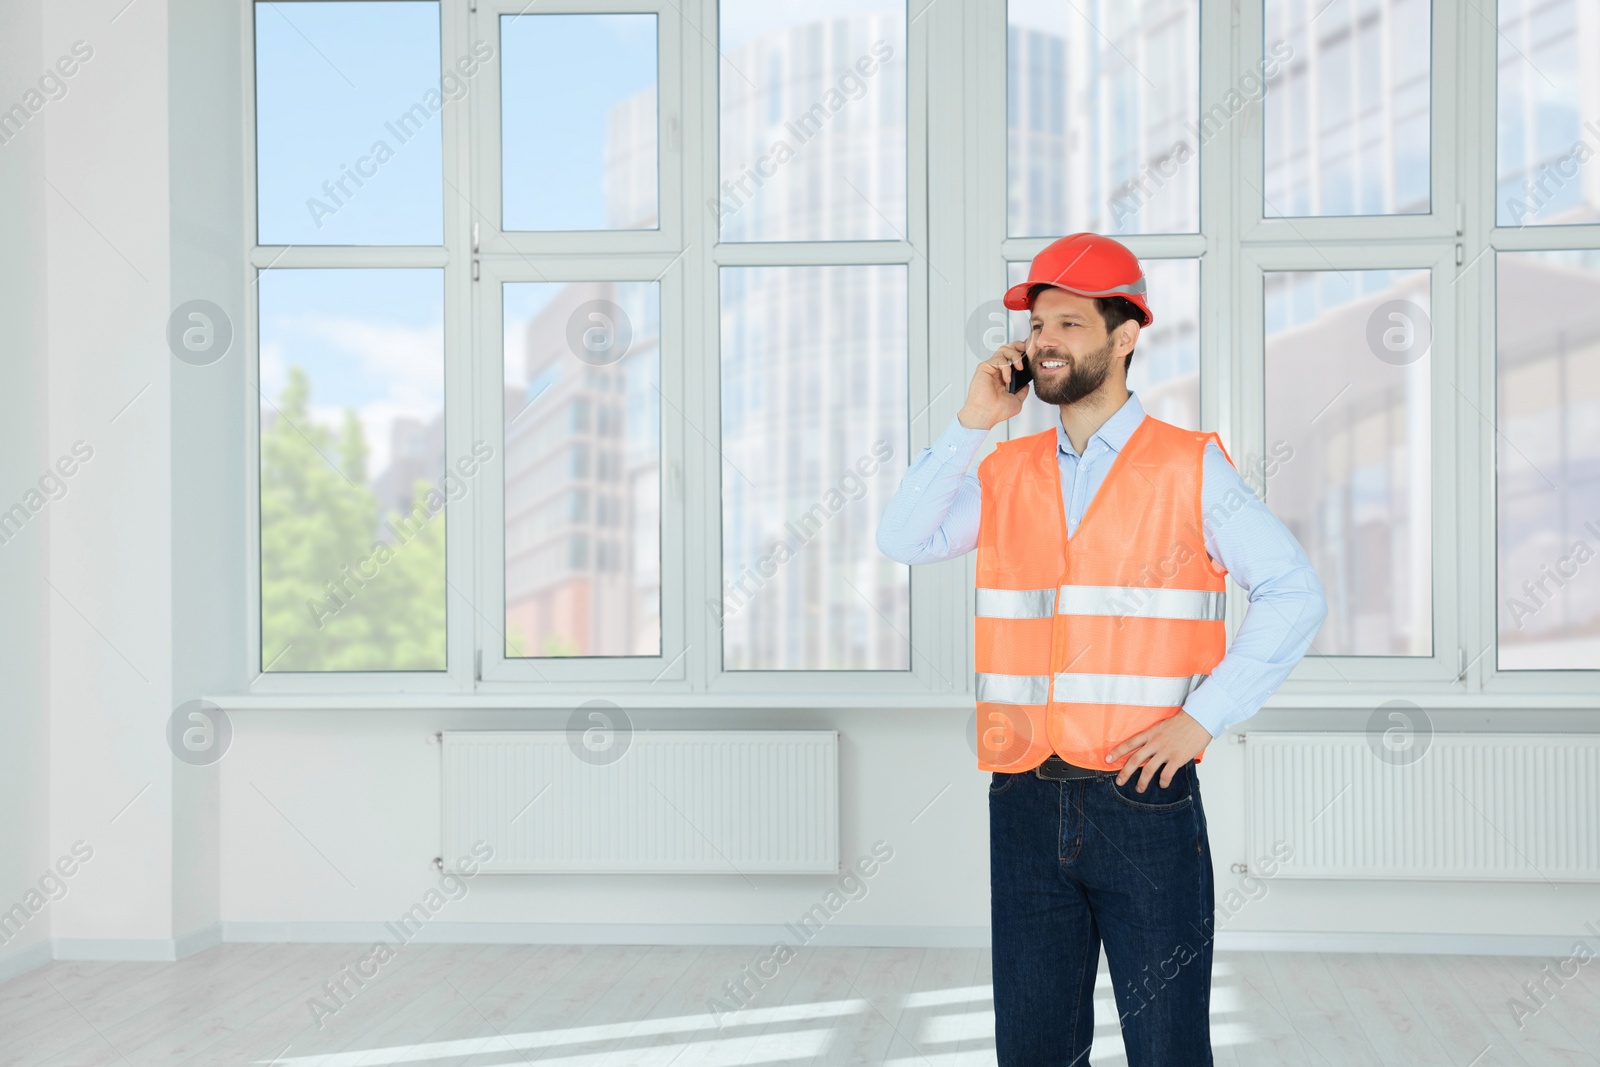 Photo of Man in reflective uniform talking on phone indoors, space for text